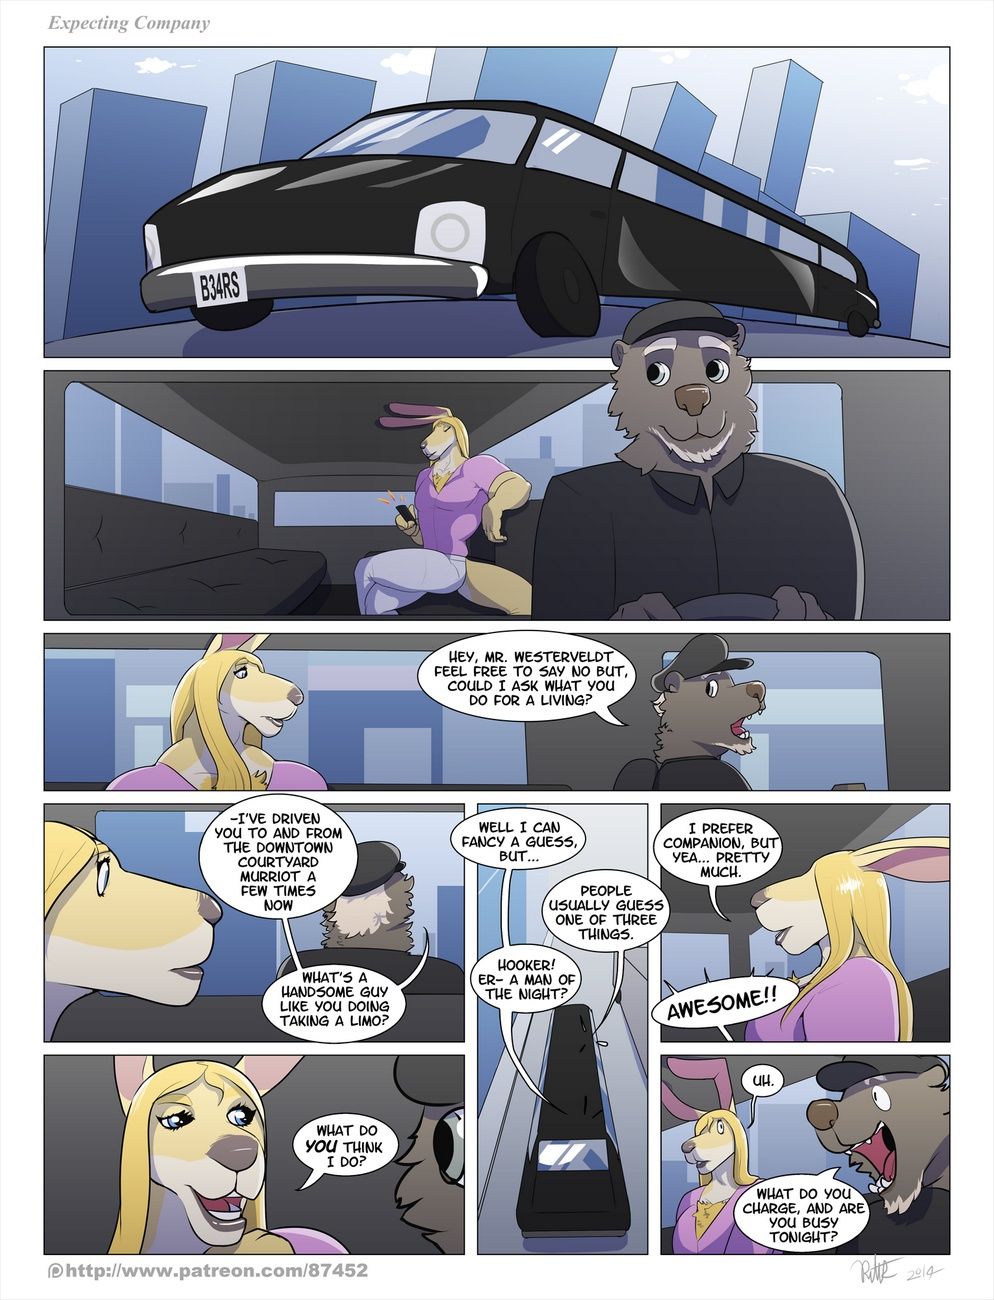 Expecting Company page 2